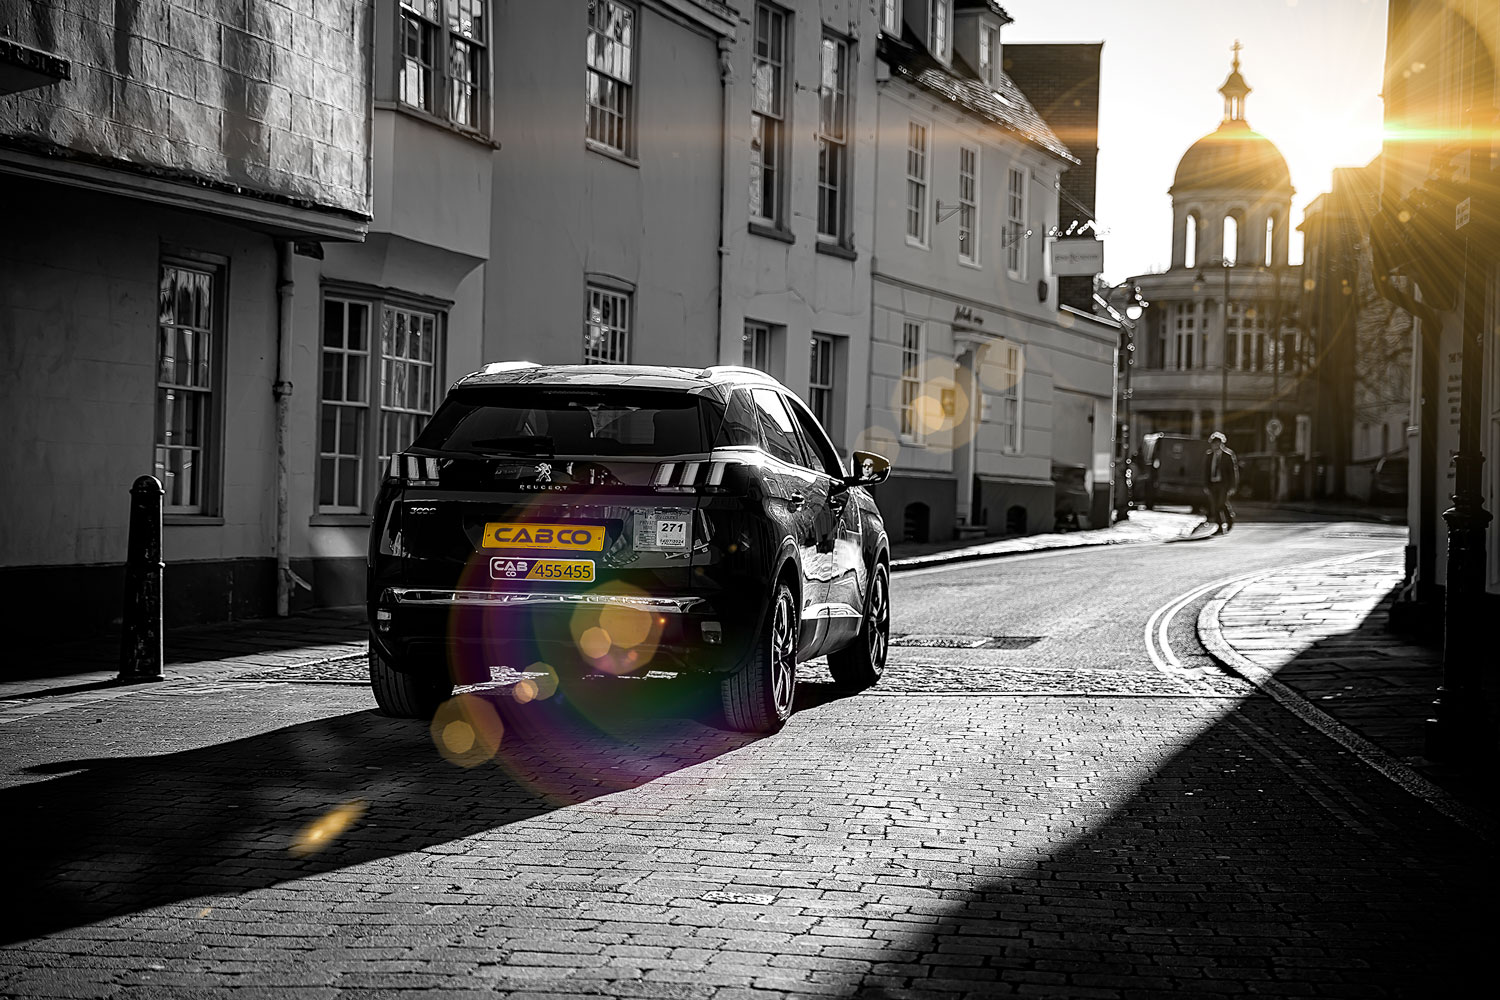 Local cab services provided by CabCo Canterbury Taxis